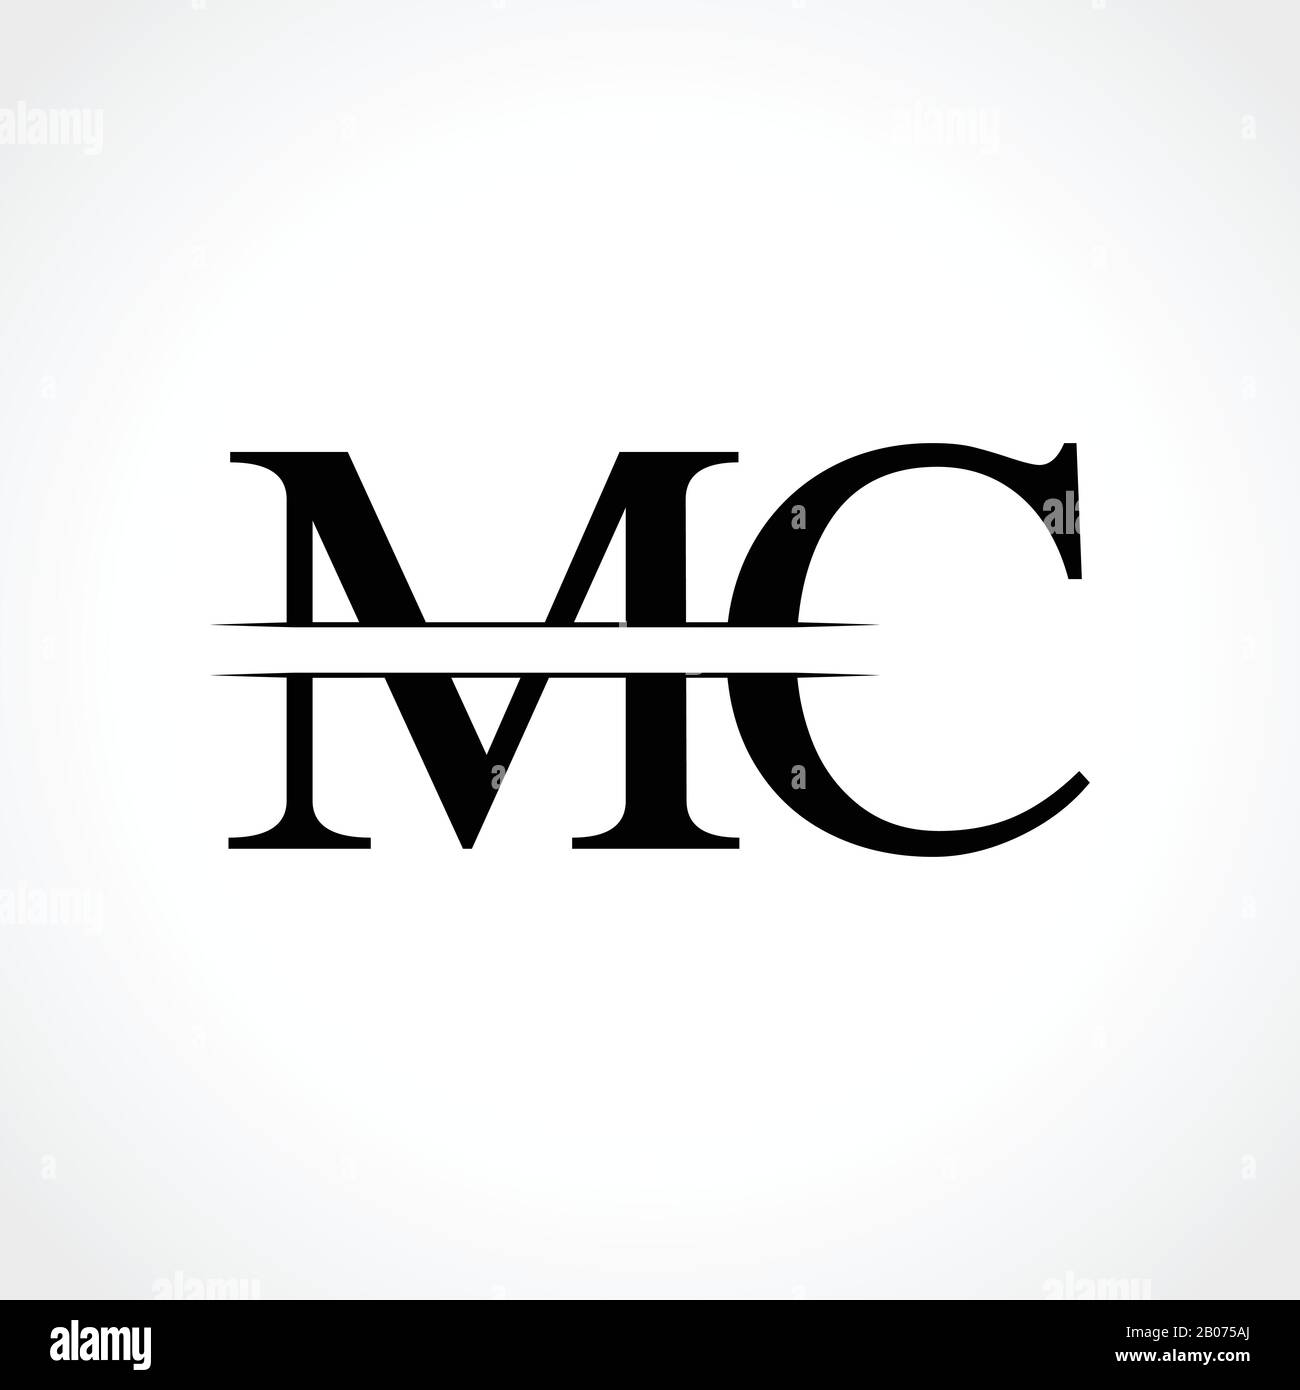 Top 99 logo mc most viewed and downloaded